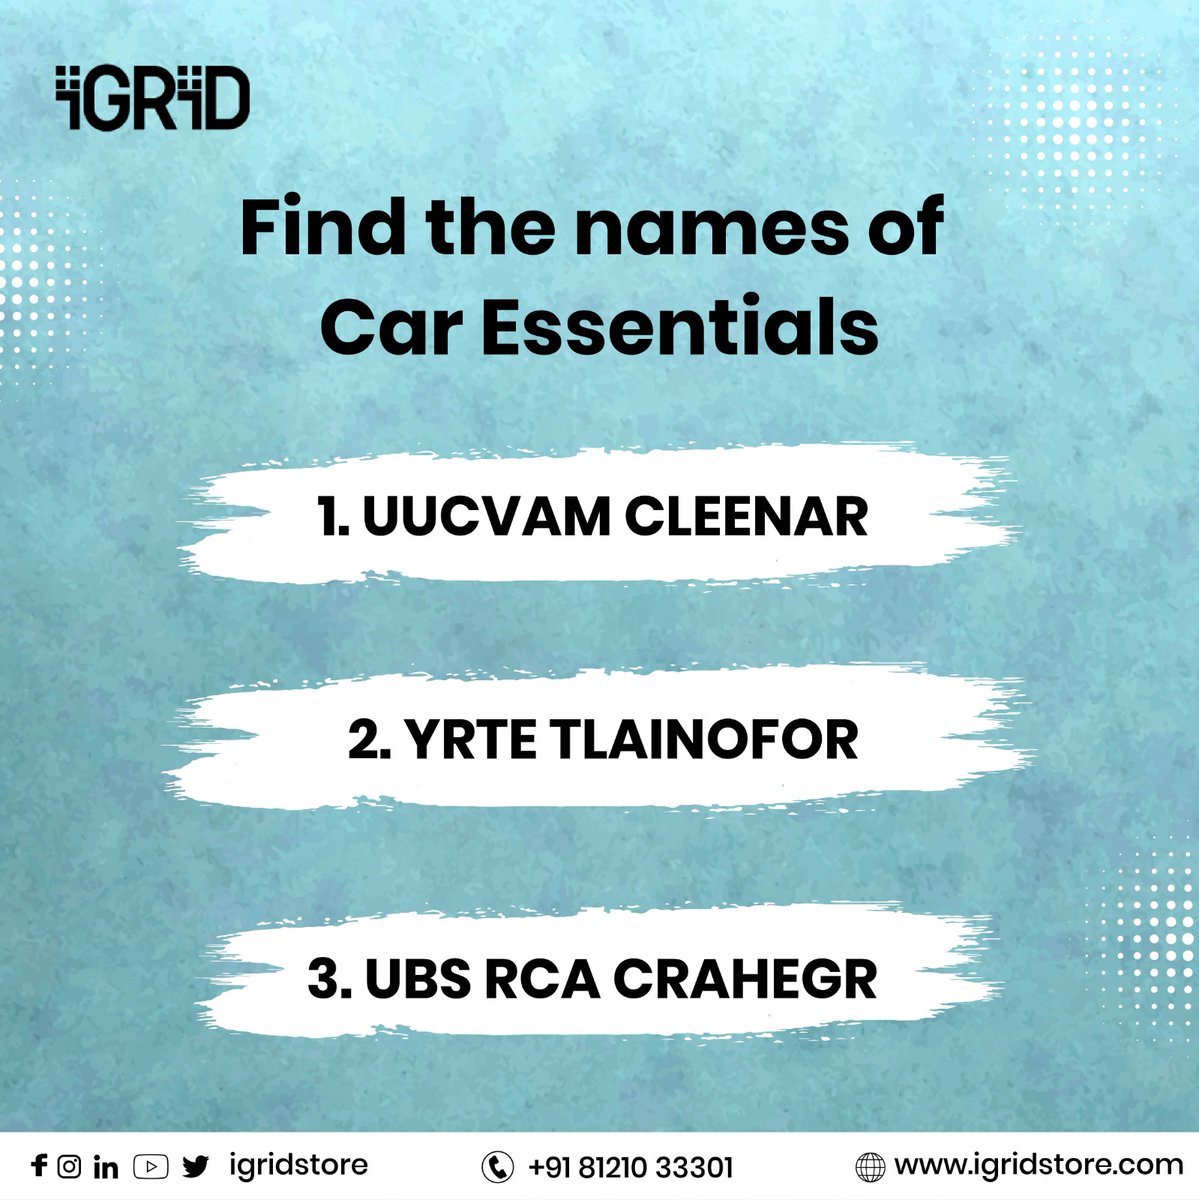 Put your word skills to the test and unjumble these Car Essentials
.
.
#iGRiD #iGRiDstore #CaressentialDevices #SmartLiving #PremiumProducts #50PercentOff #DiscountSale #BestDeals #ShopNowSaveBig #OnlineShopping #LimitedTimeOffer #buynow #freeshipping